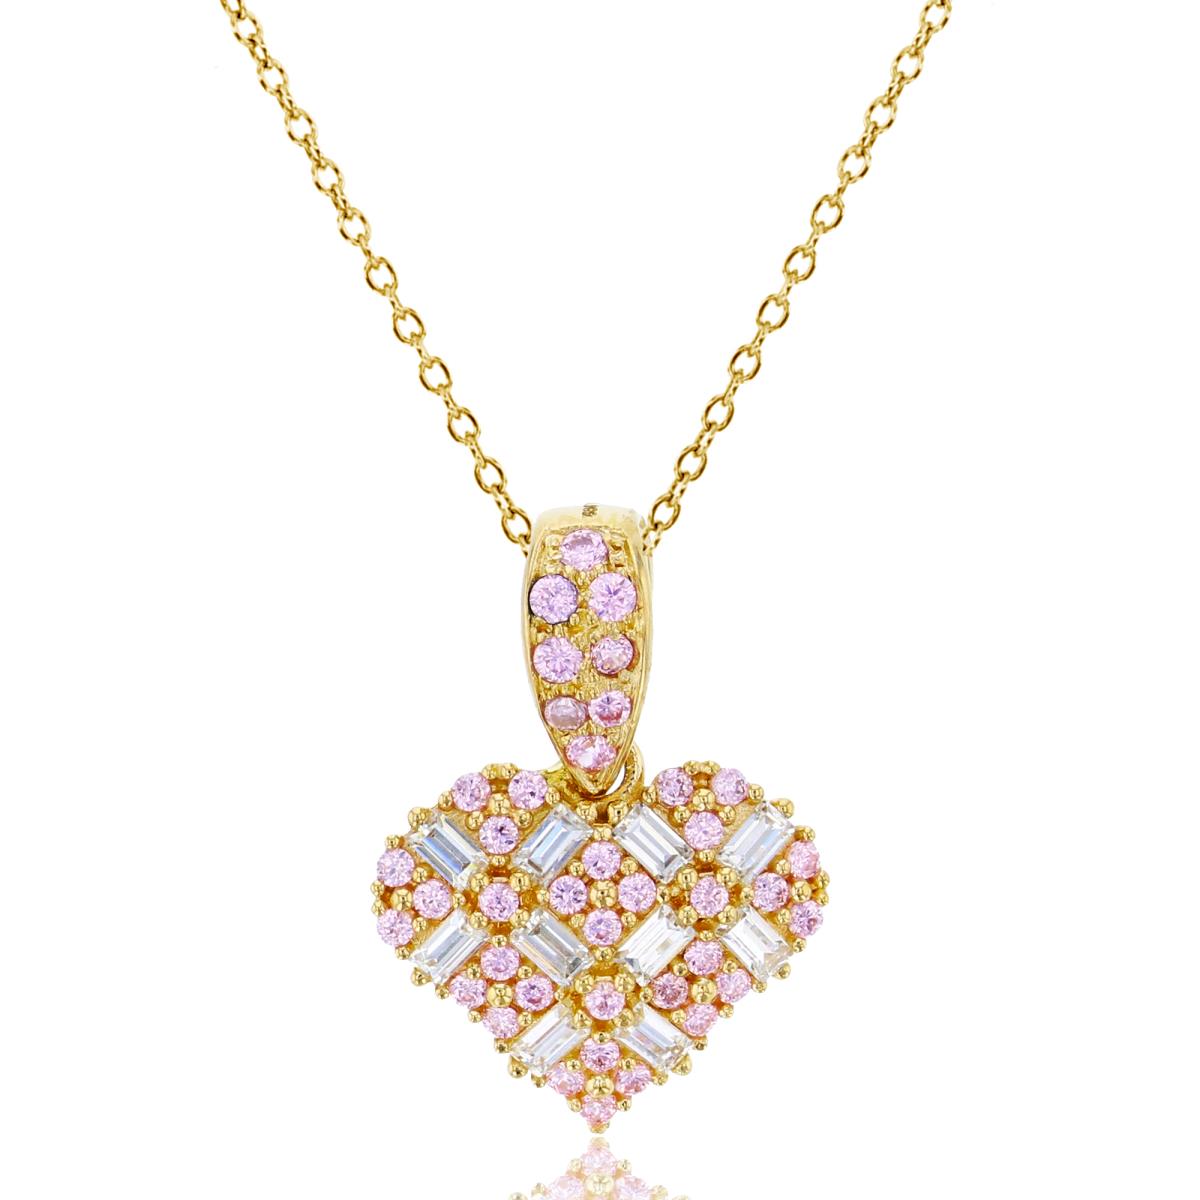 10K Yellow Gold Micropave Pink Rd Cut & White Baguette CZ "X" Heart 18" Necklace